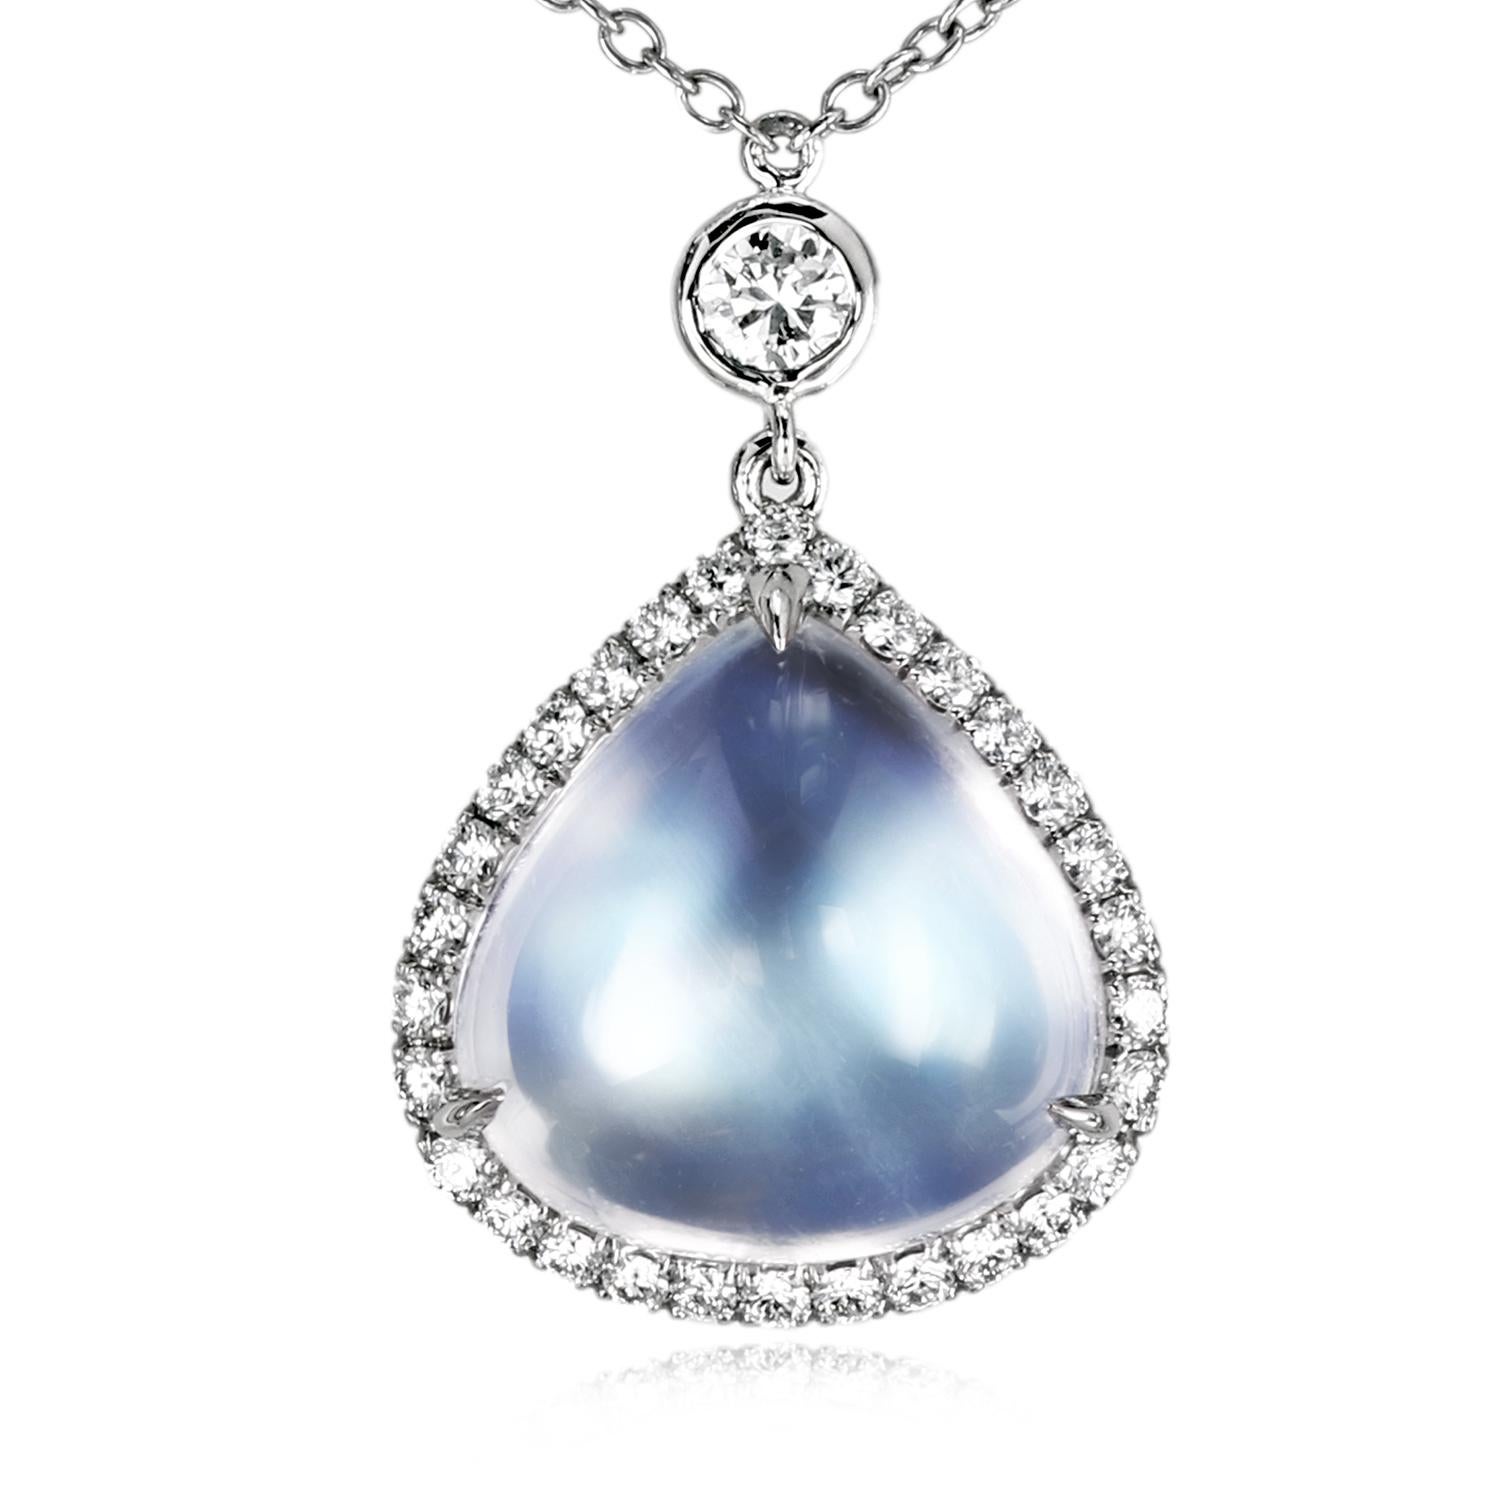 Leon Mege moonstone pendant is the ultimate embodiment of timeless glamour and unsurpassable style. This exquisite jewel features a natural 5.35-carat blue moonstone in a delicate micro pave halo of remarkable fire and brilliance. 
The must-have